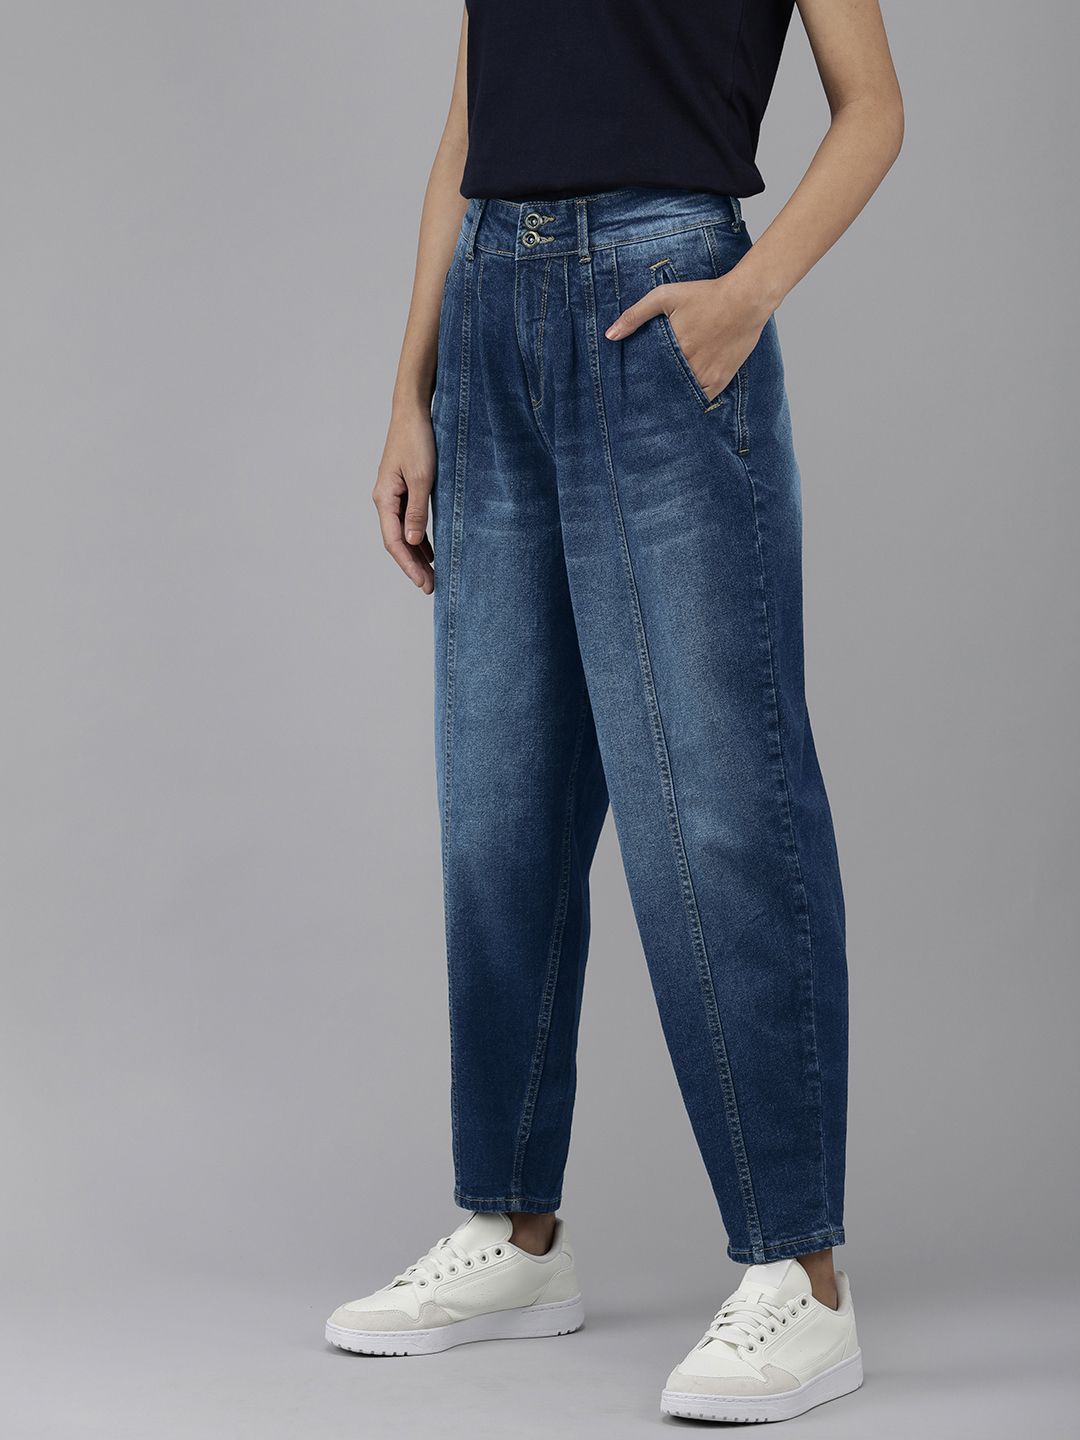 The Roadster Lifestyle Co Women Blue High-Rise Light Fade Slouchy Fit Stretchable Jeans Price in India